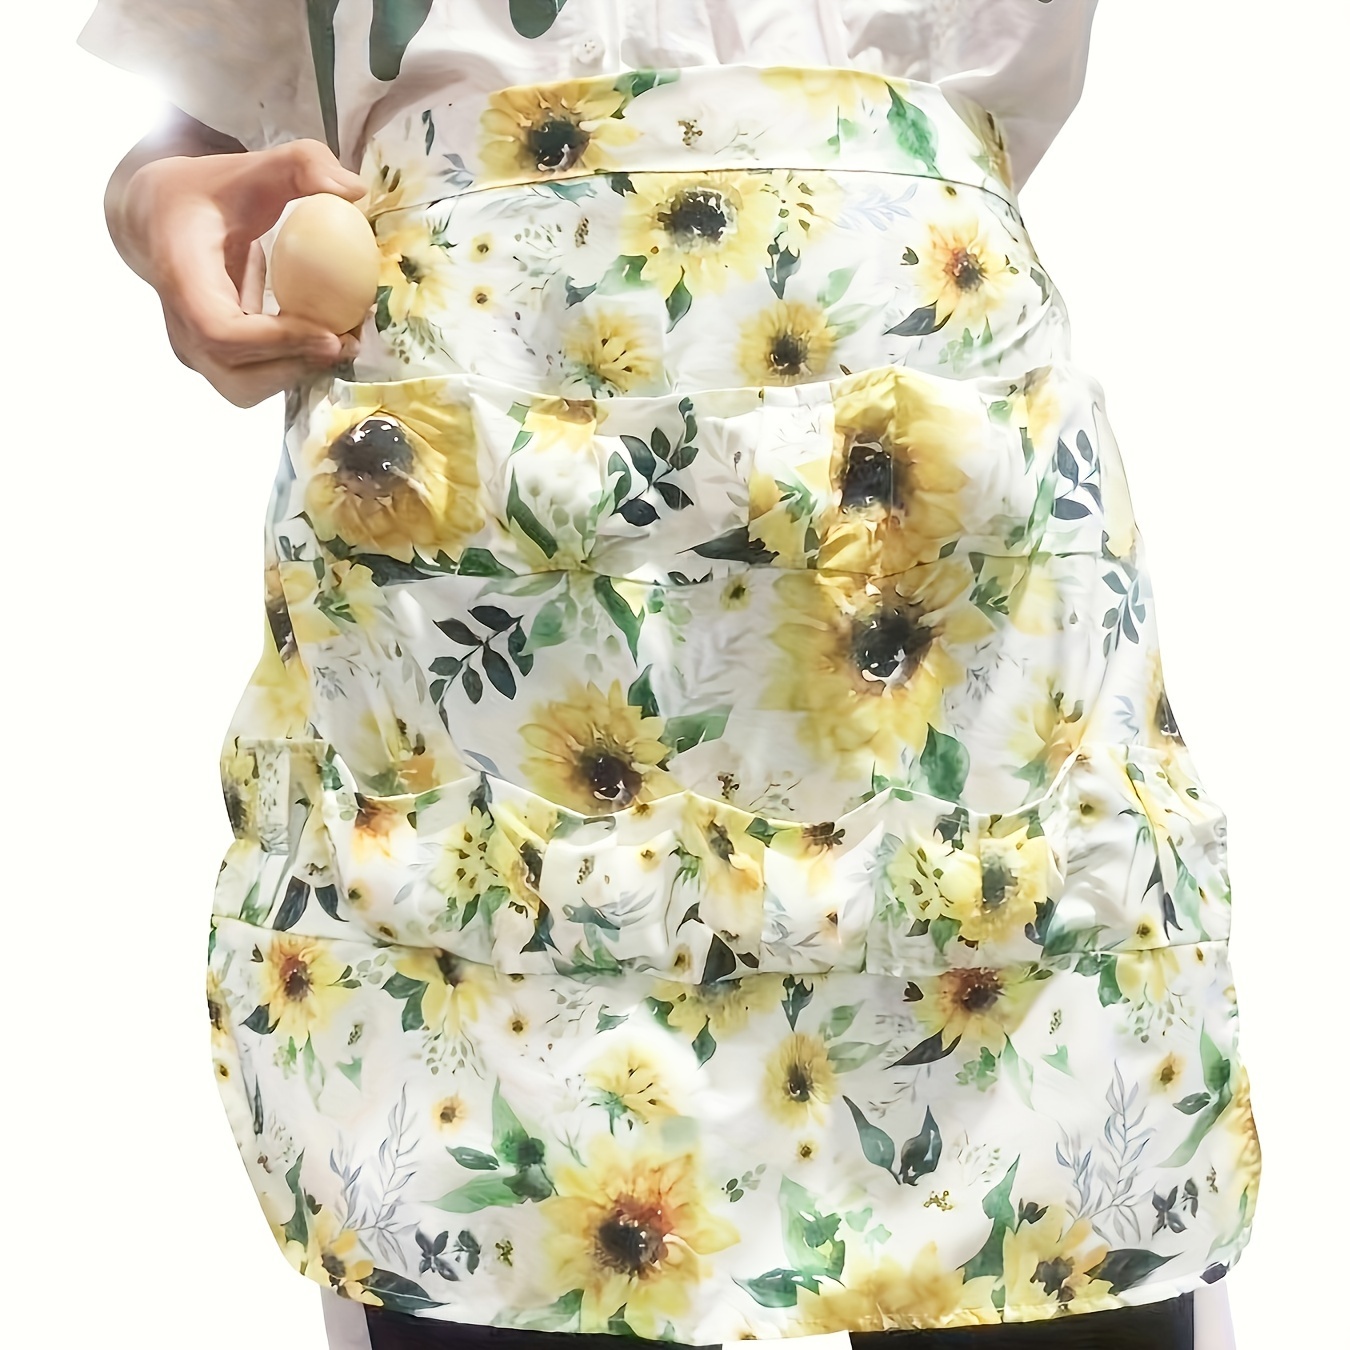 1pc Chicken Print Multi-pocket Apron With Egg Collecting Bag